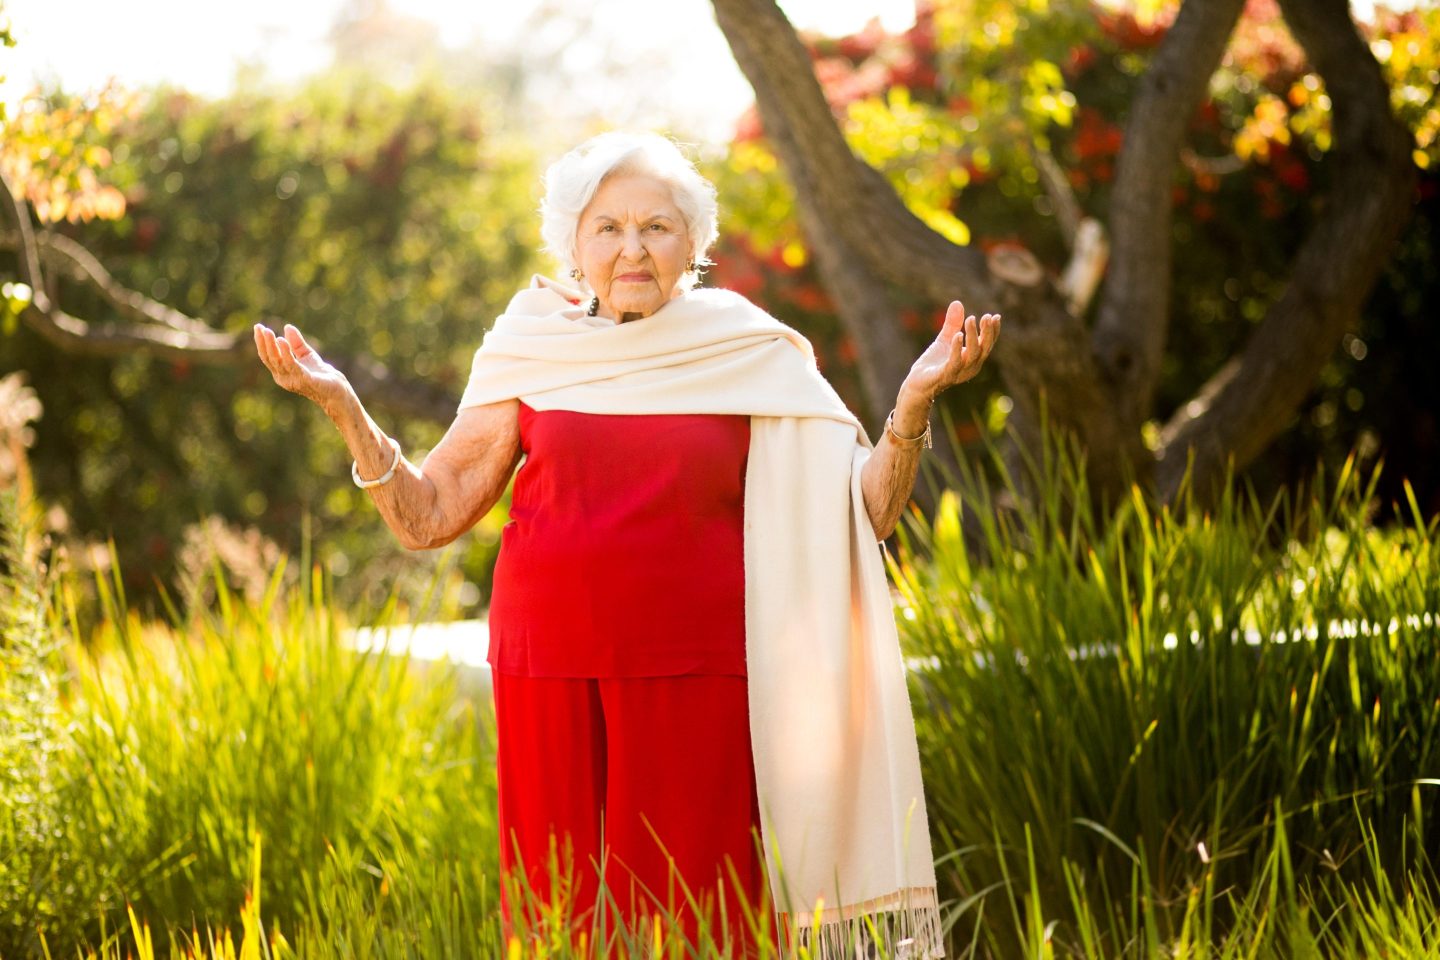 An elderly woman in a red dress standing in tall grass with her arms outstretched